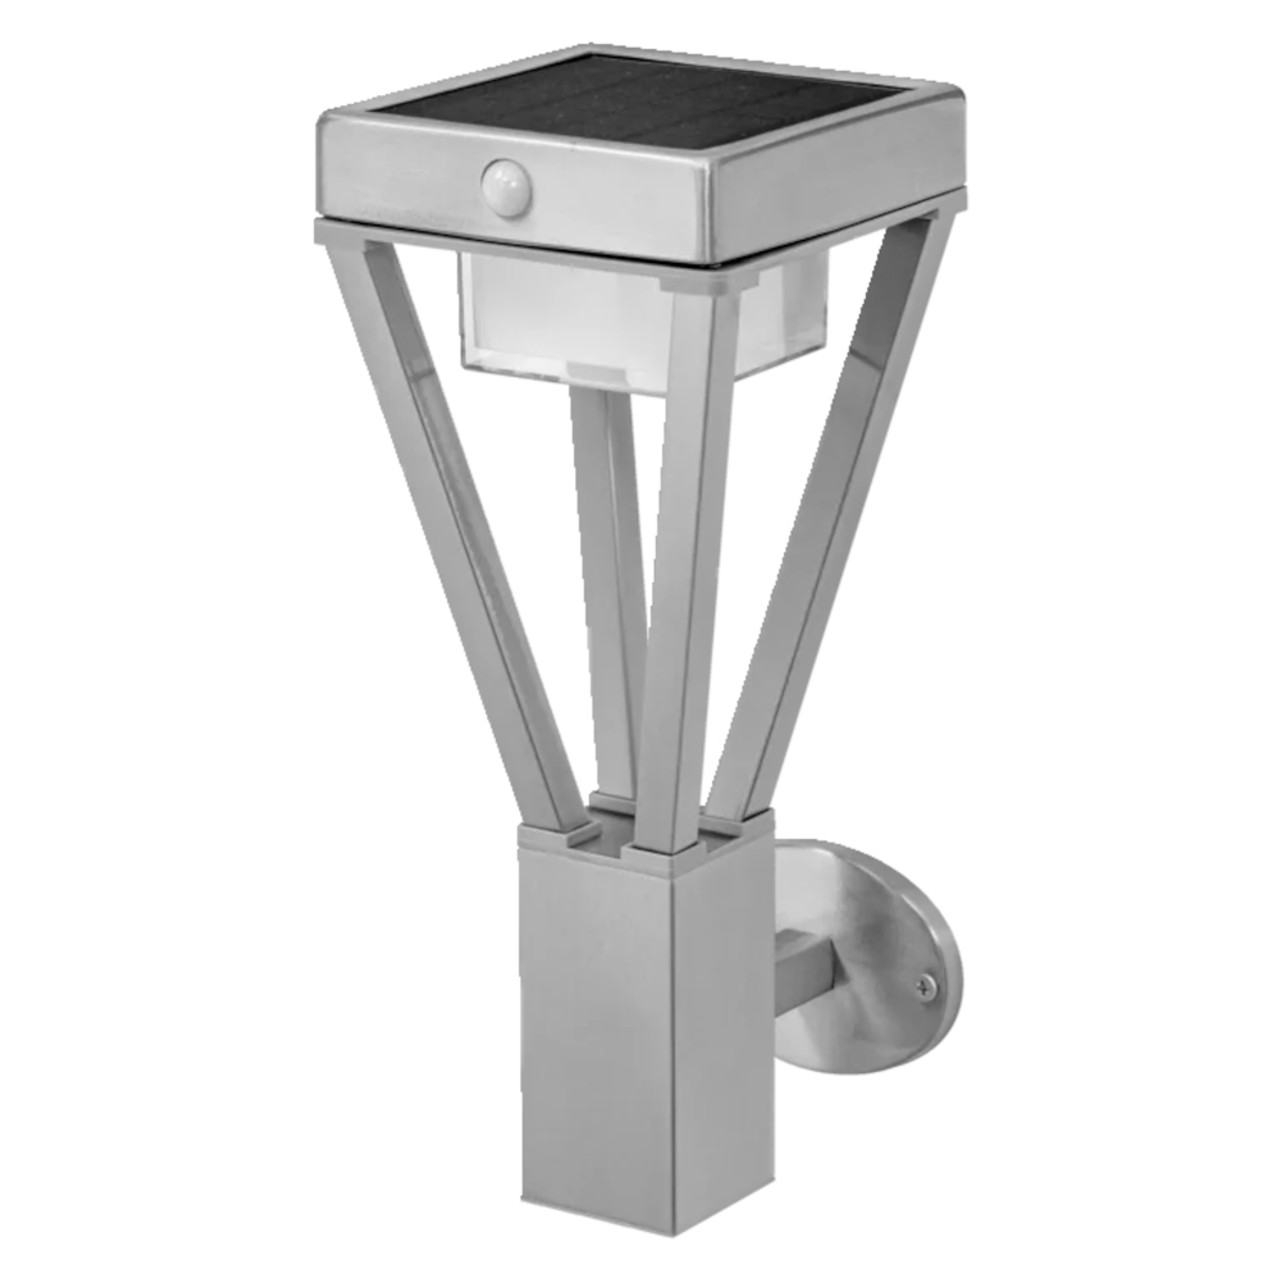 LED Stainless Steel Bouquet Wall Light Solar Powered with Sensor 6W 3000K IP44